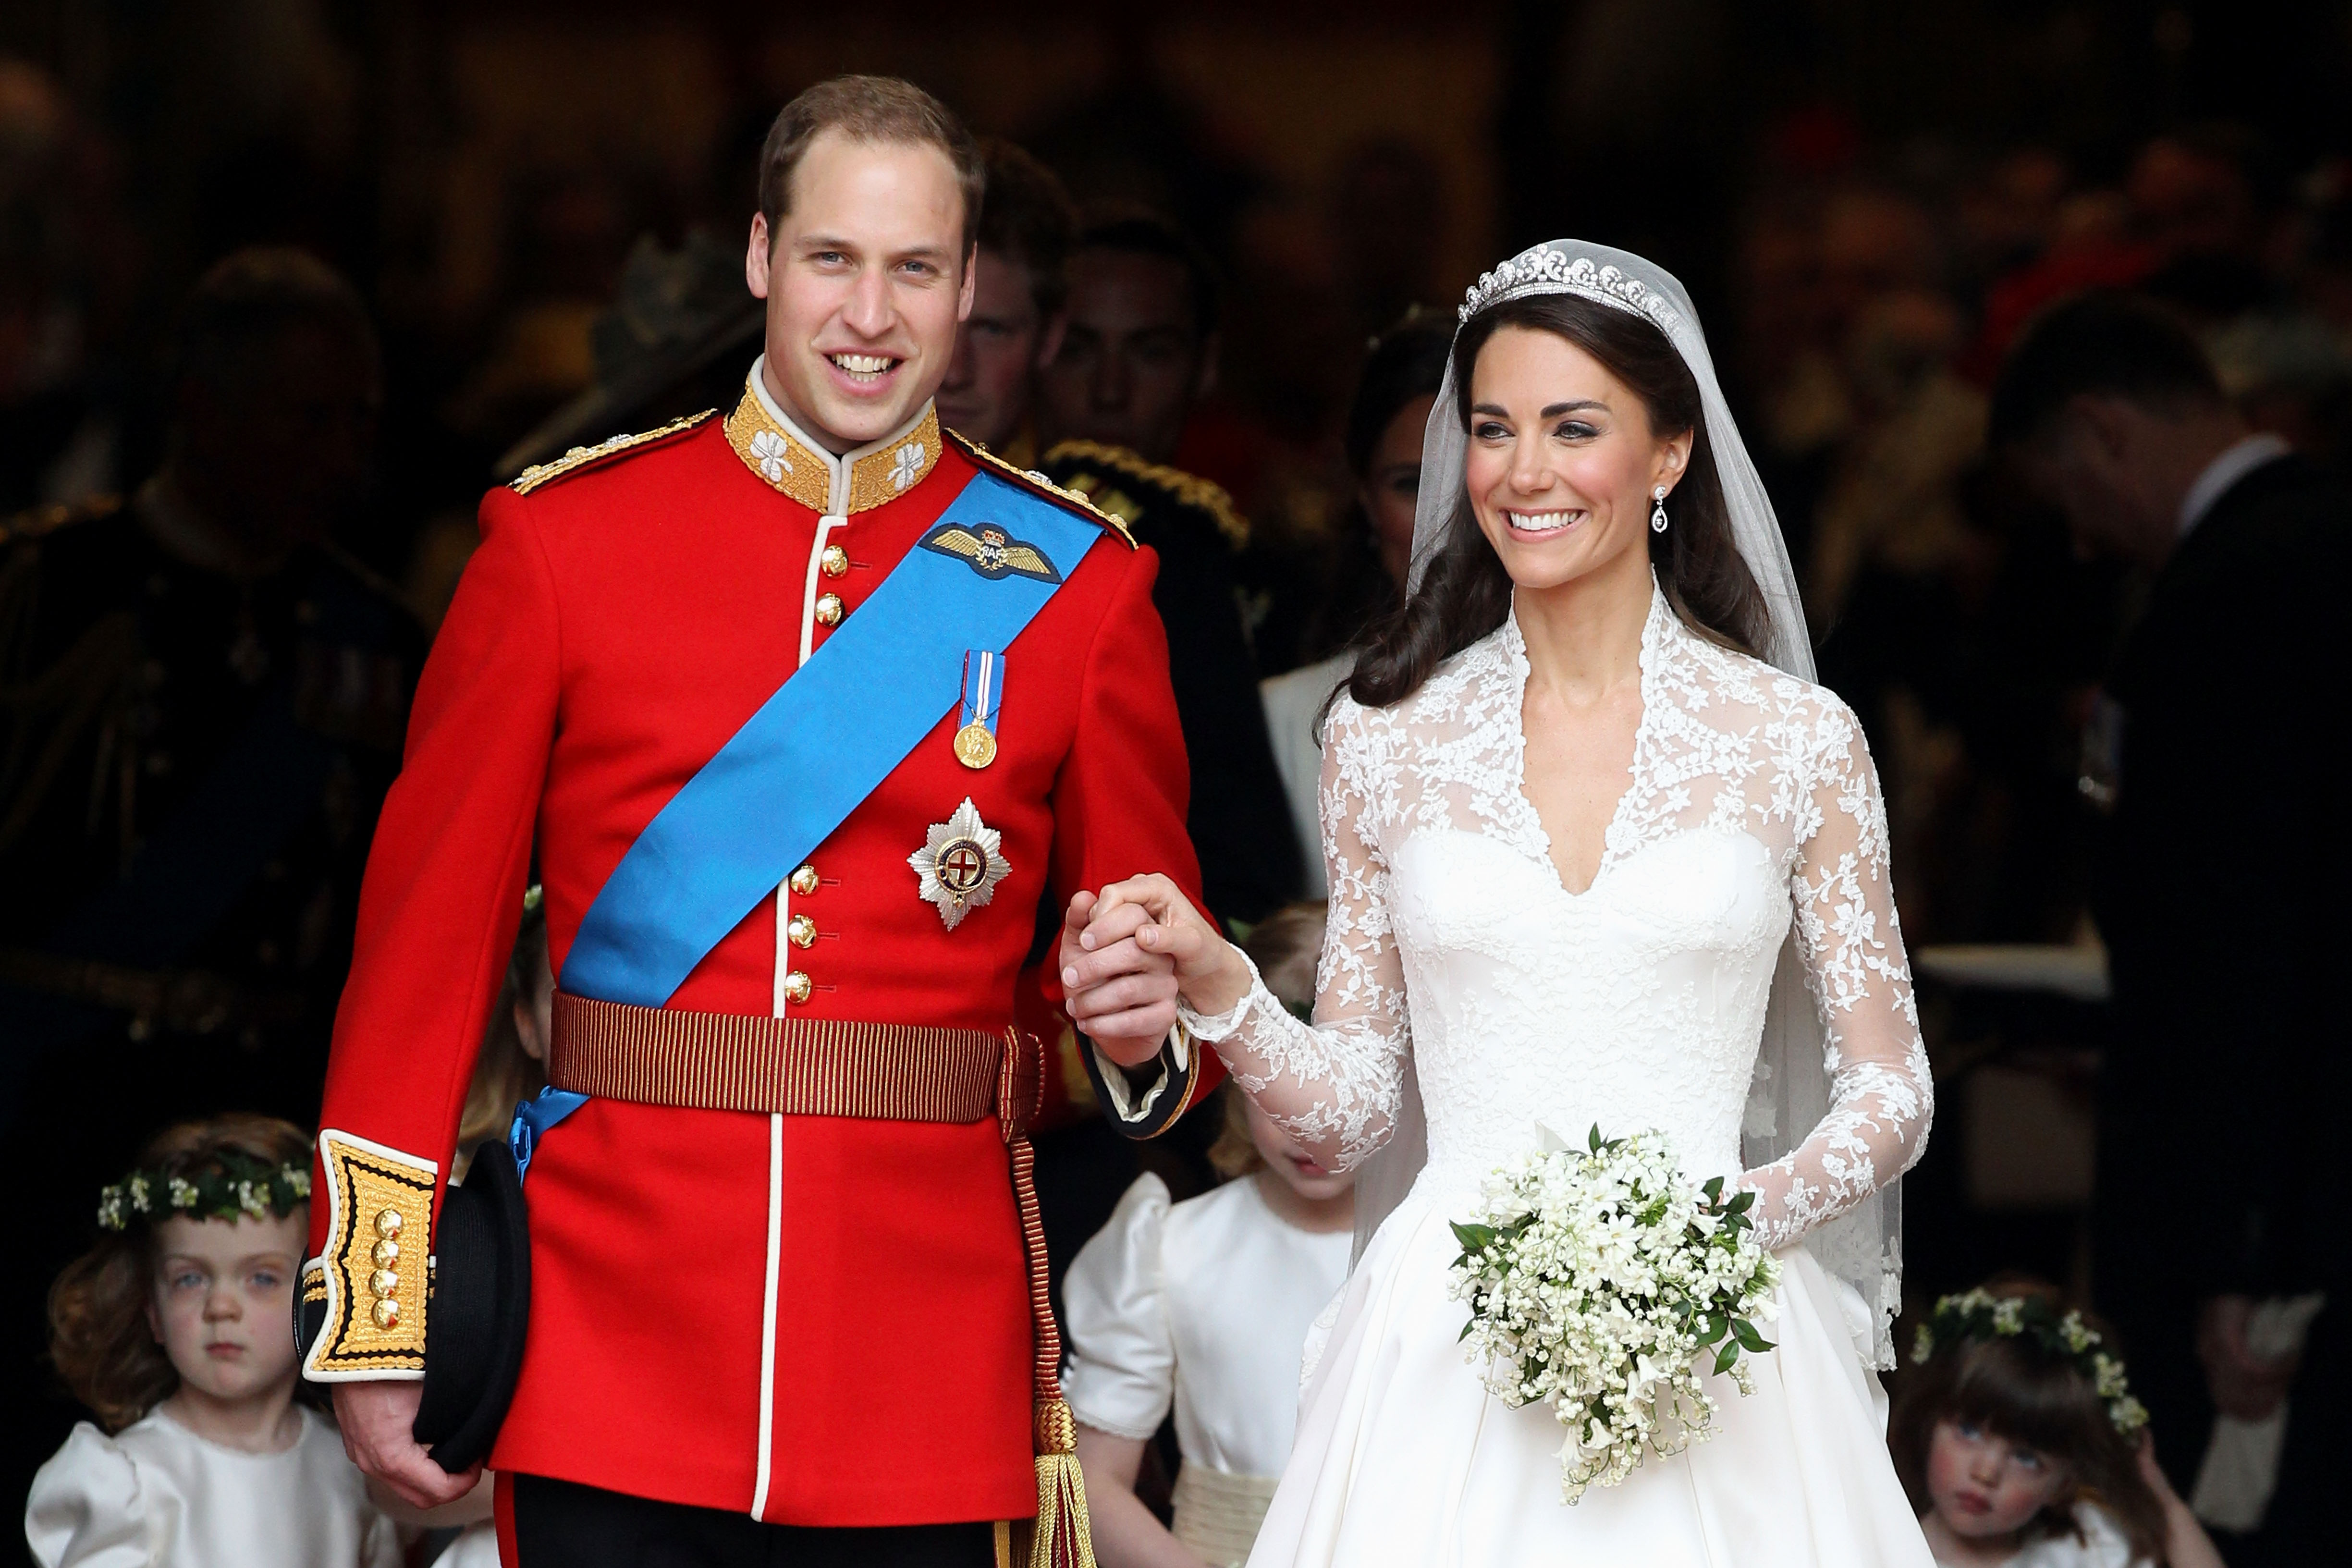 Prince William and Kate Middleton leaving Westminster Abbey on their wedding day